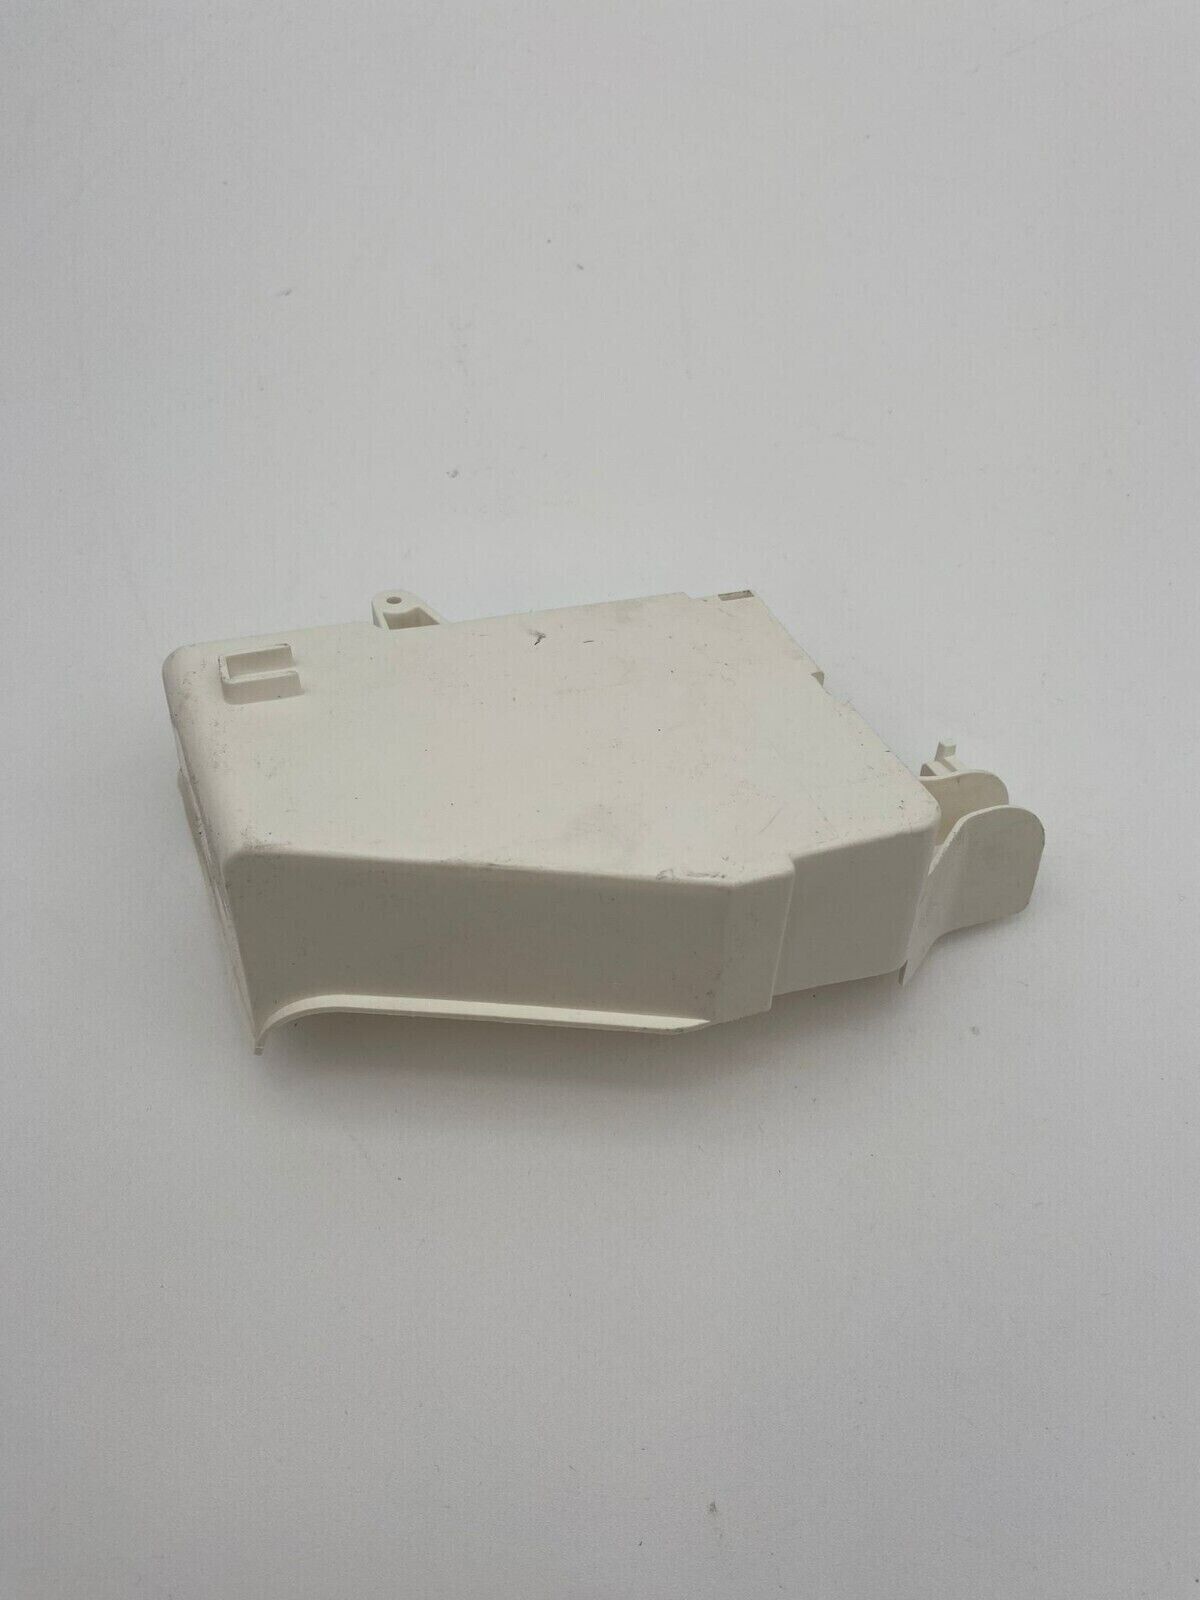 Samsung DC63-00870A Washer Door Lock Cover